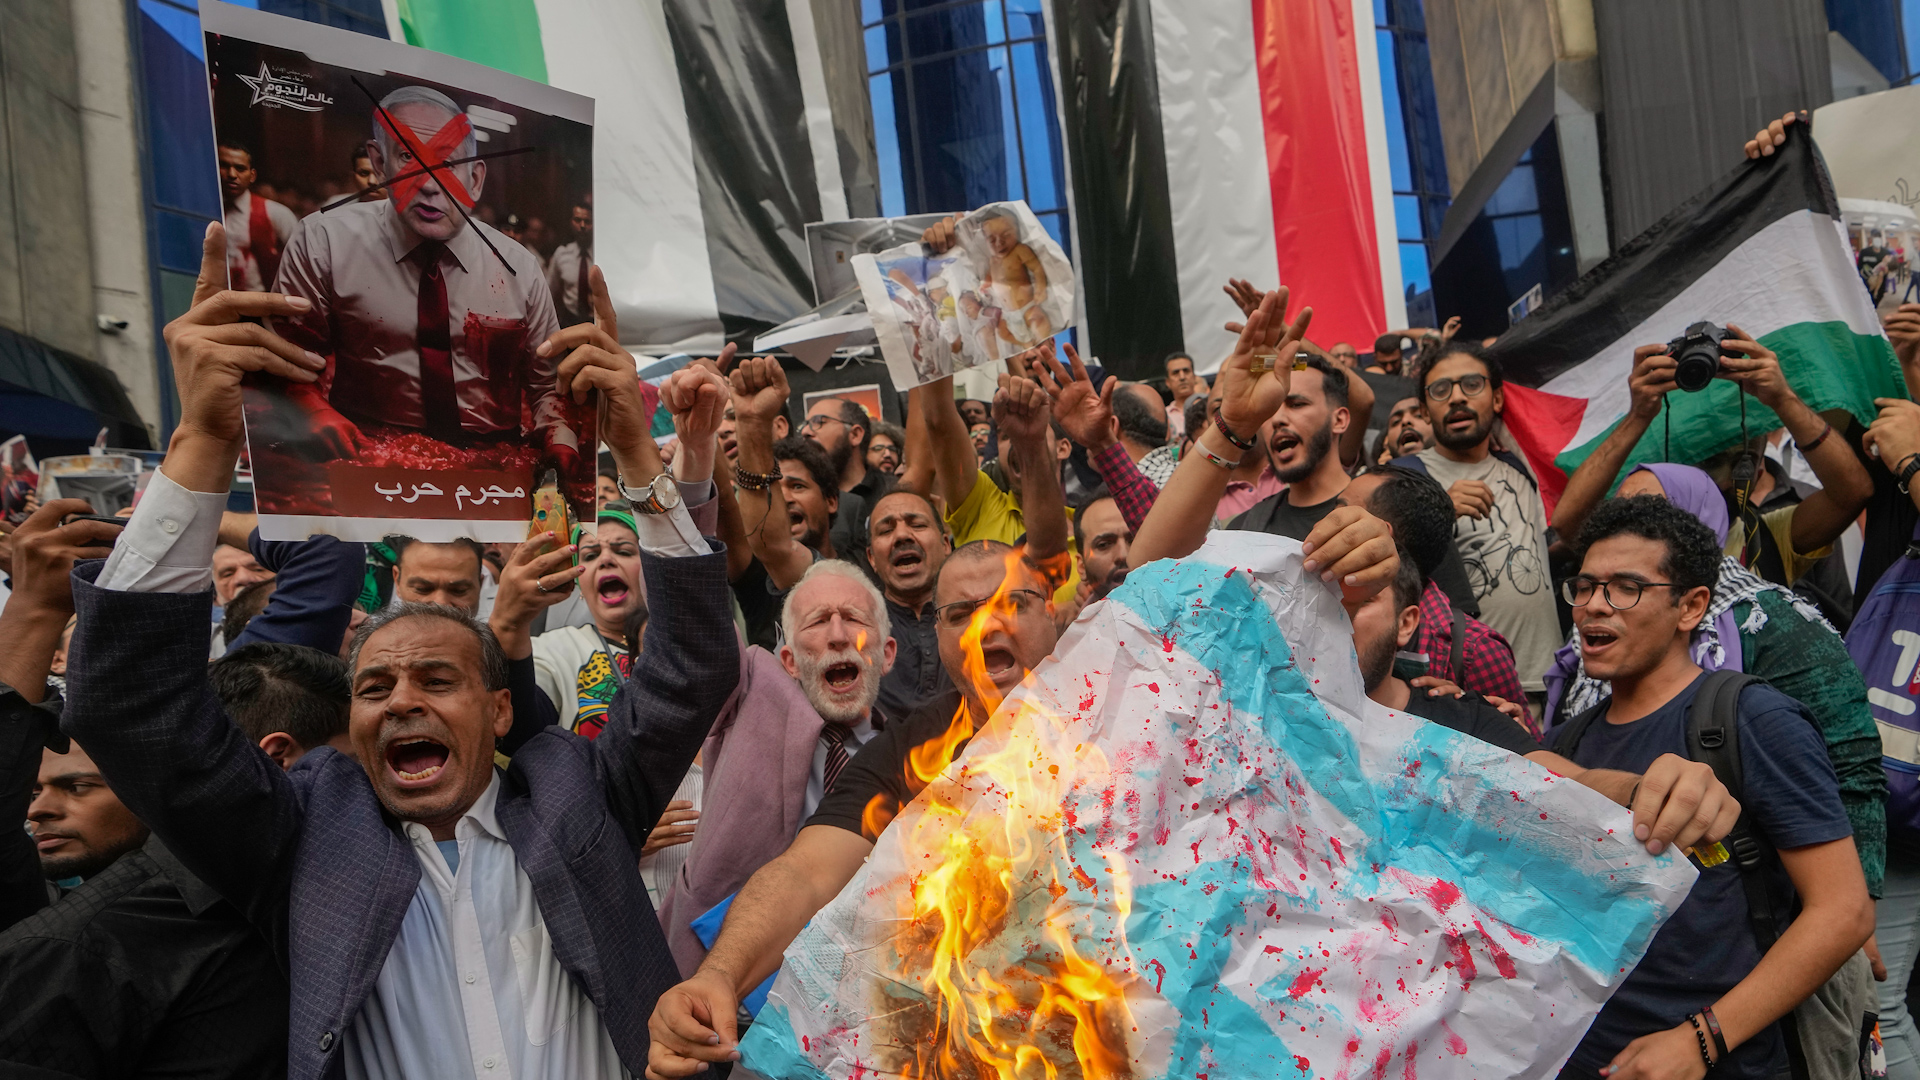 Egyptian protesters burn an Israeli flag during a demonstration to show solidarity with Palestinians, in front of the Journalists Syndicate in Cairo on October 18.